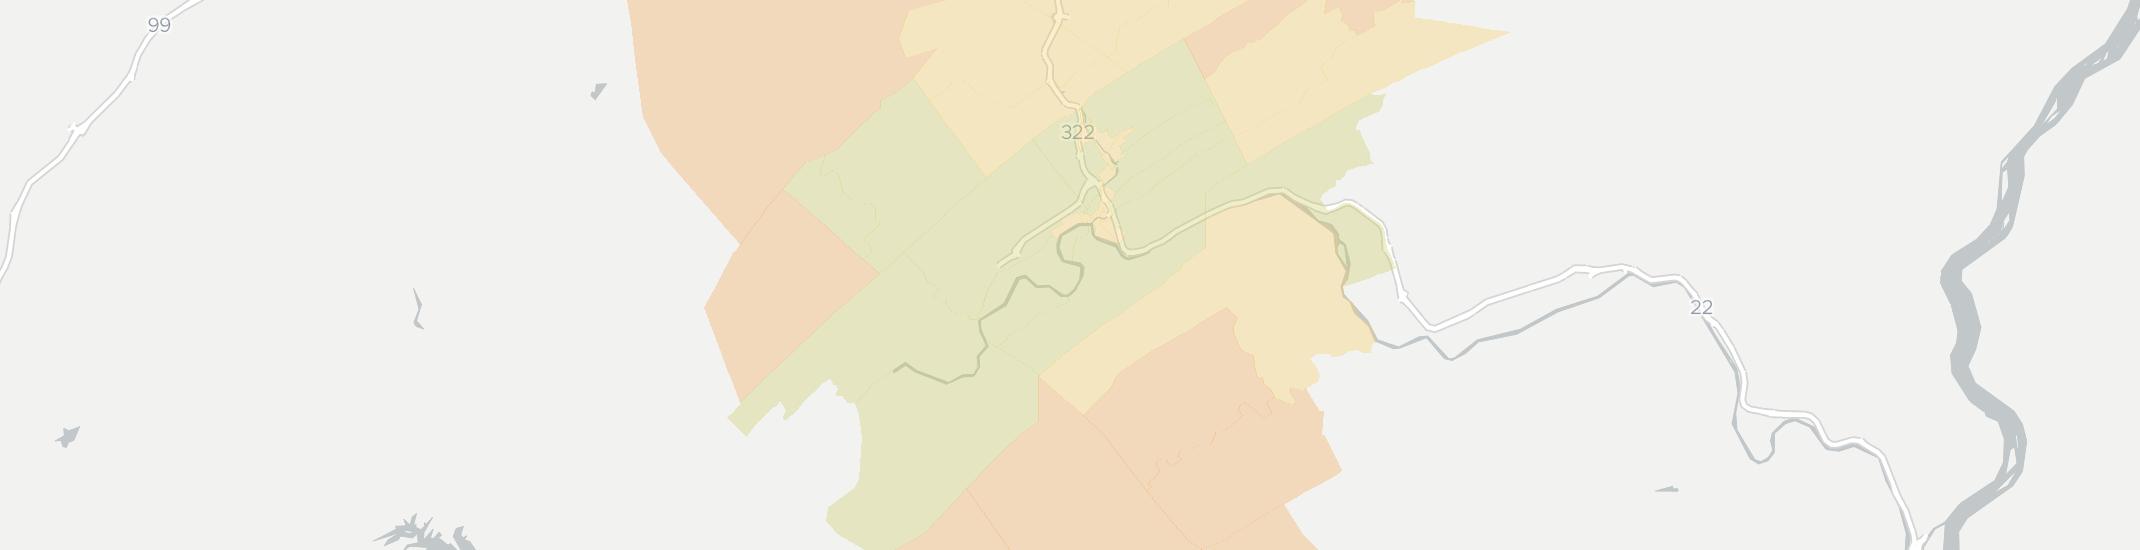 Lewistown Internet Competition Map. Click for interactive map.